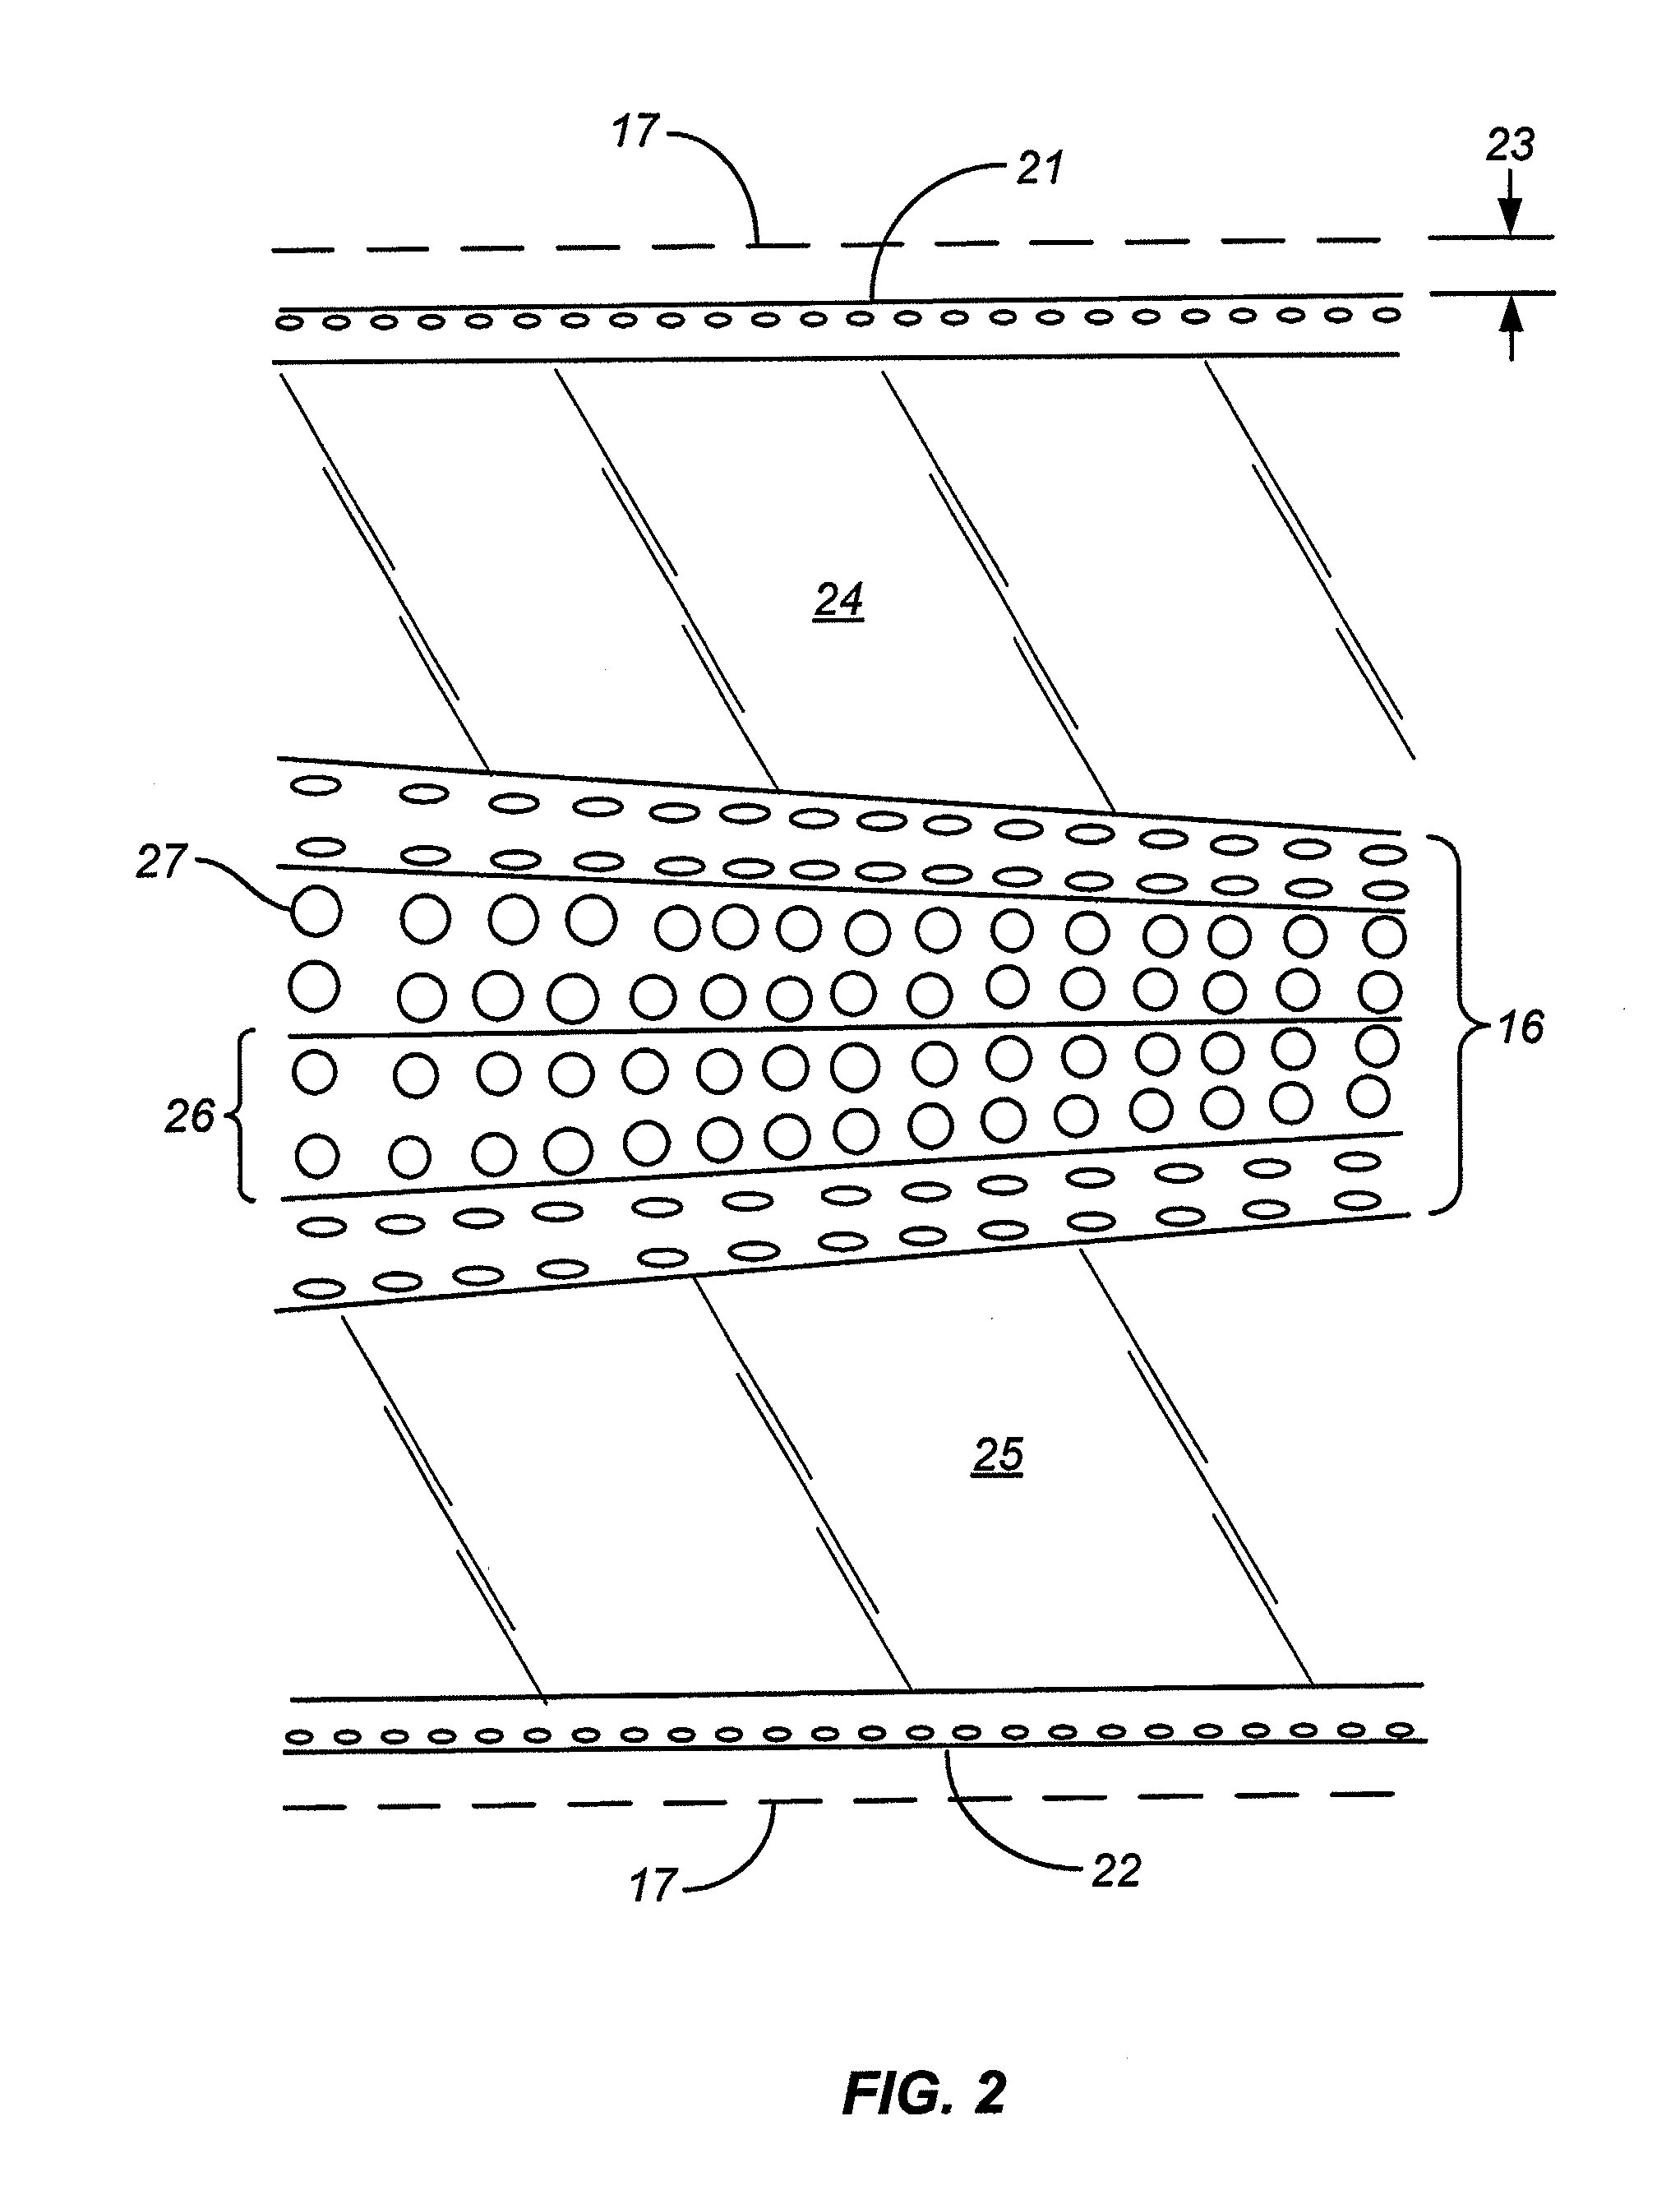 Barrel-type fish/particle screen with adjustable flow distribution and debris removal